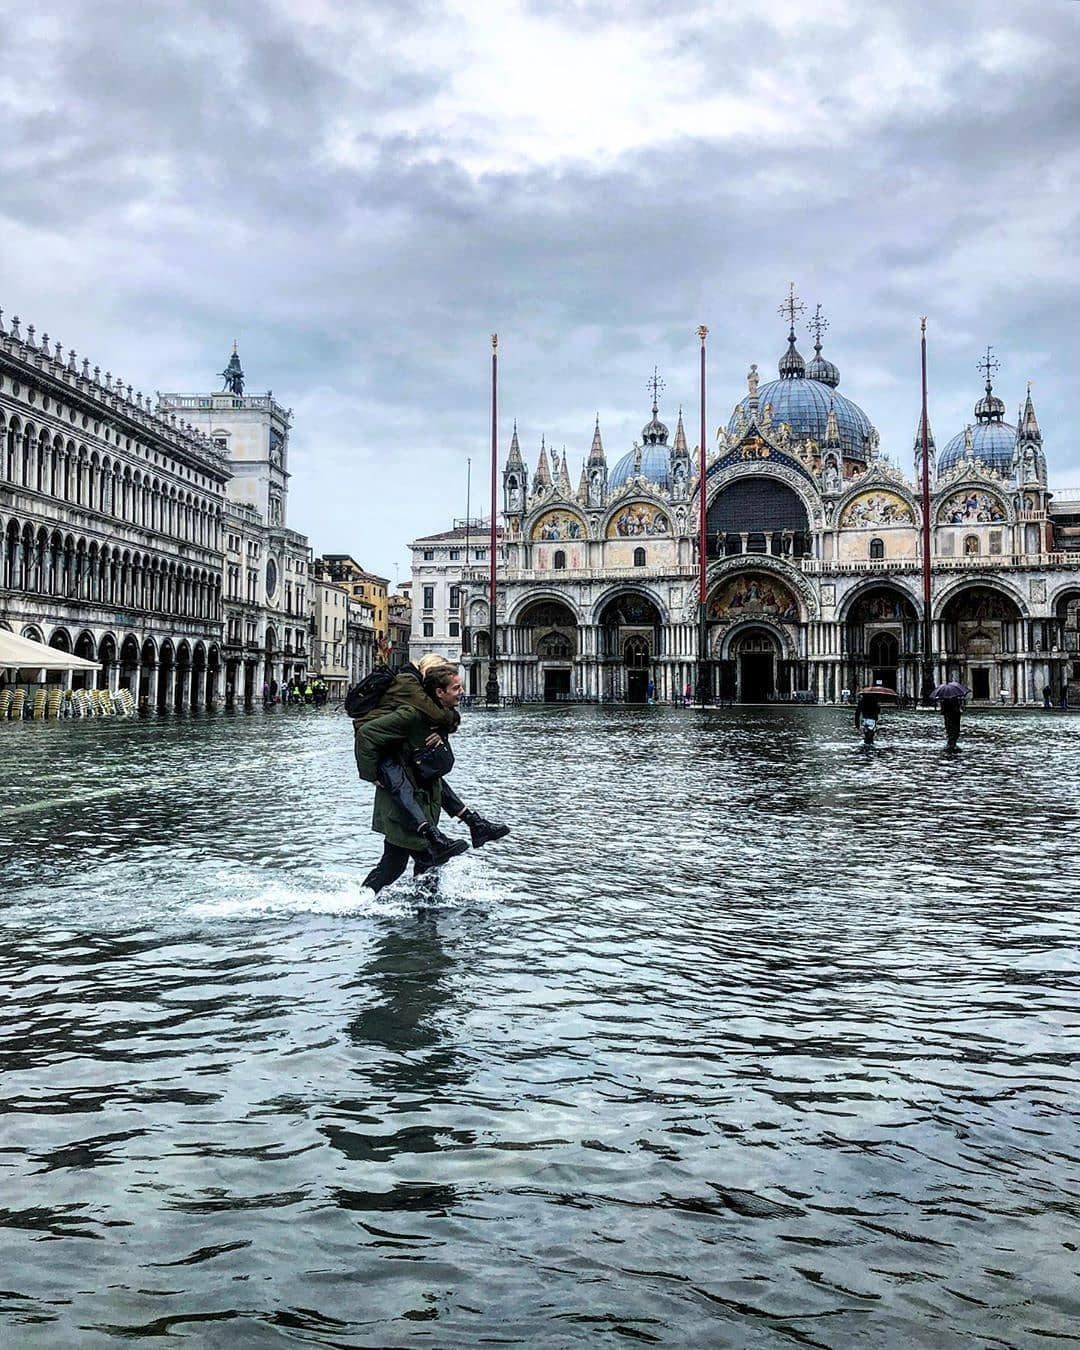 Meanwhile in Venice